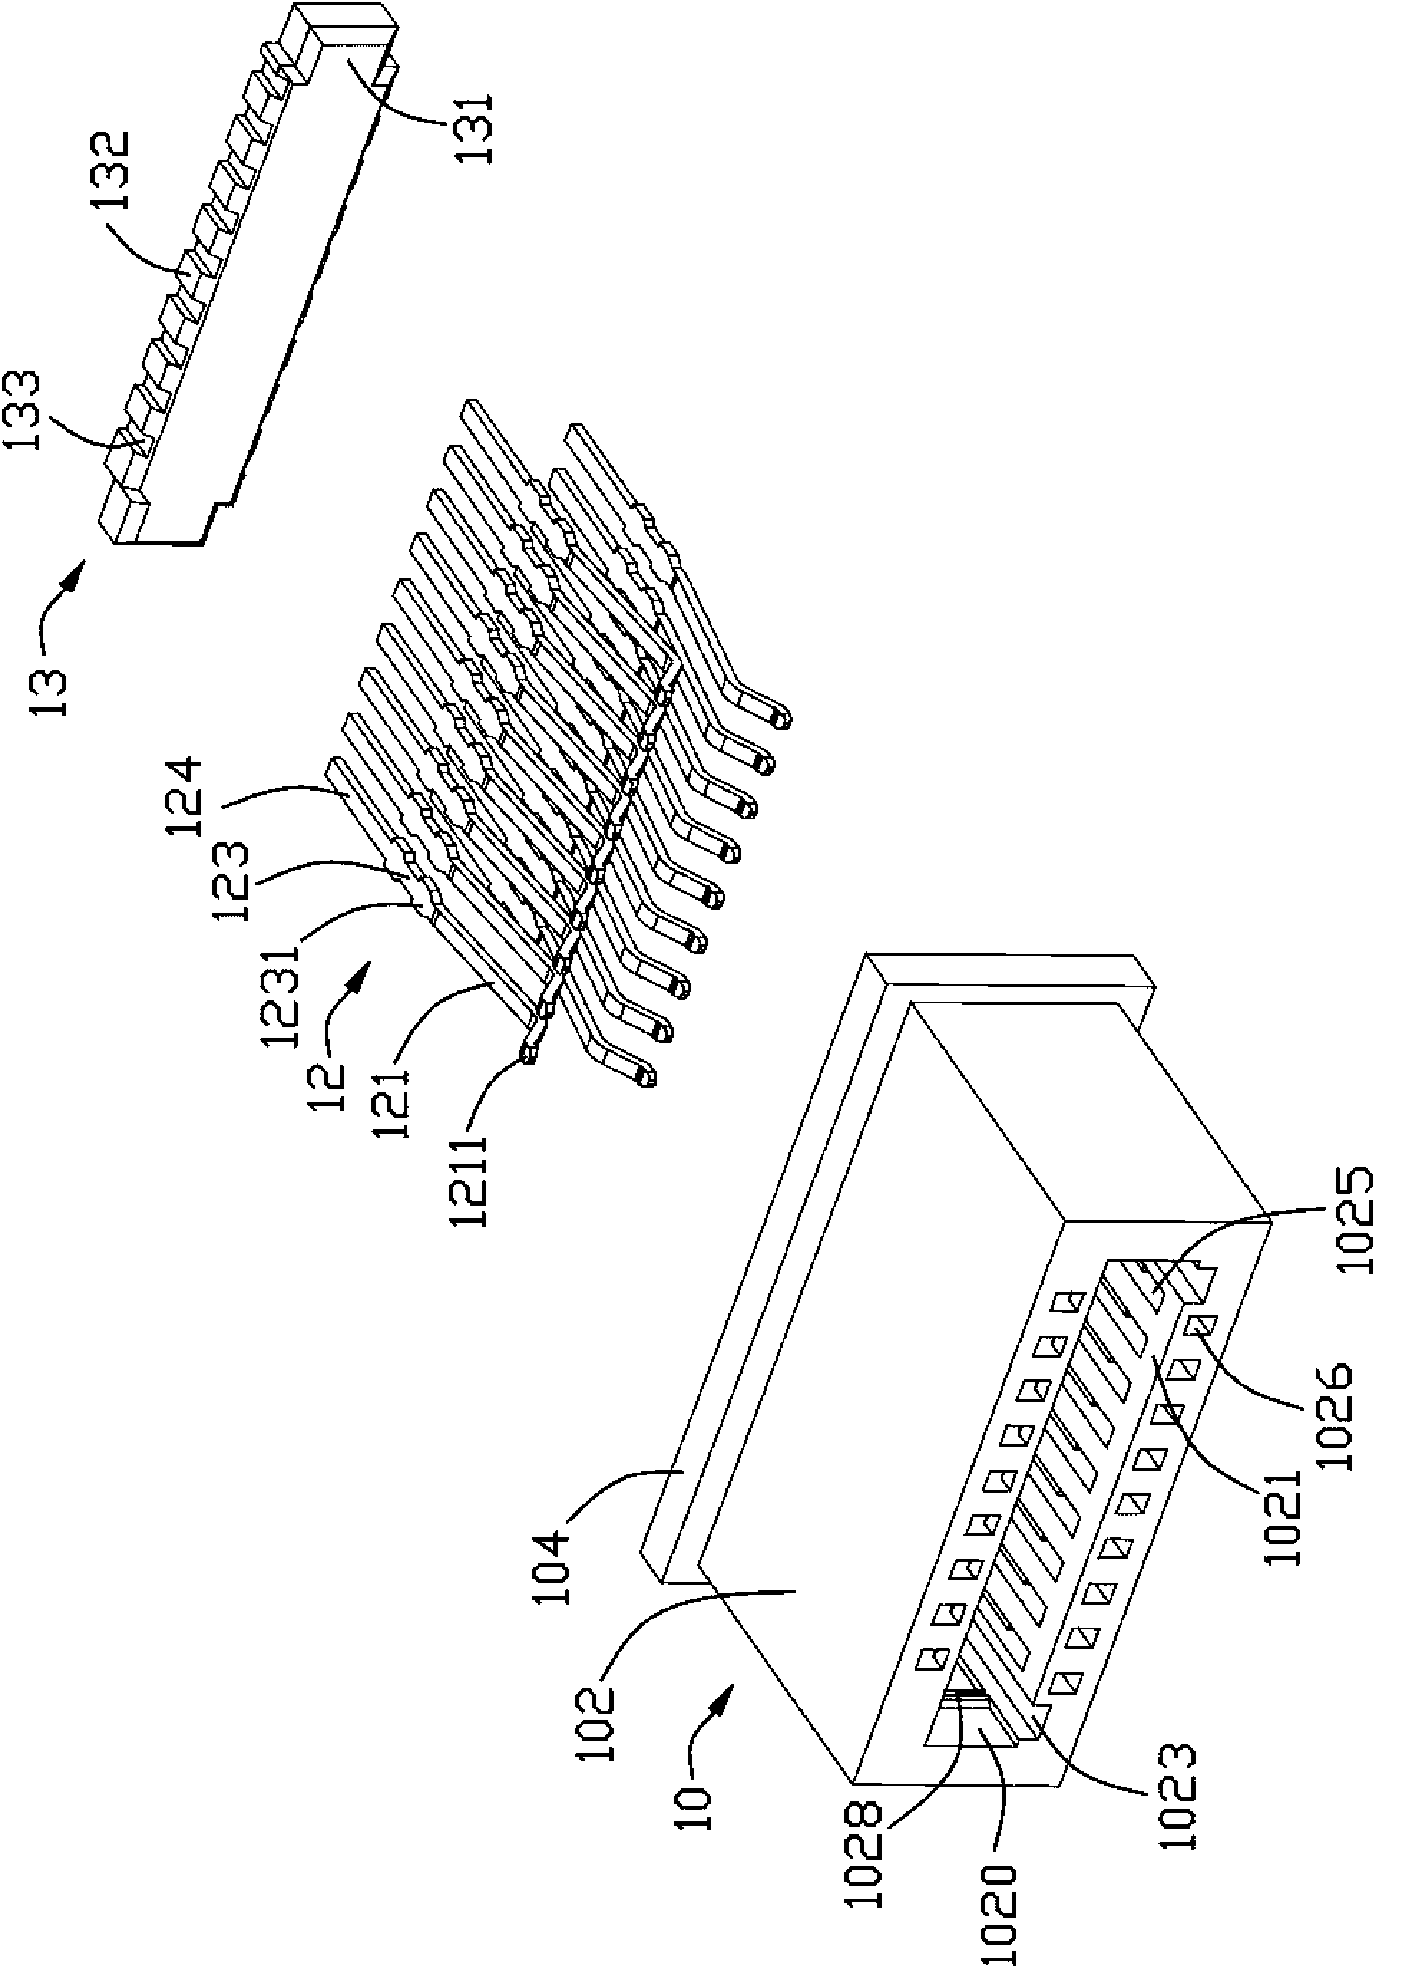 Electric connector assembly and its socket electric connector and plug electric connector